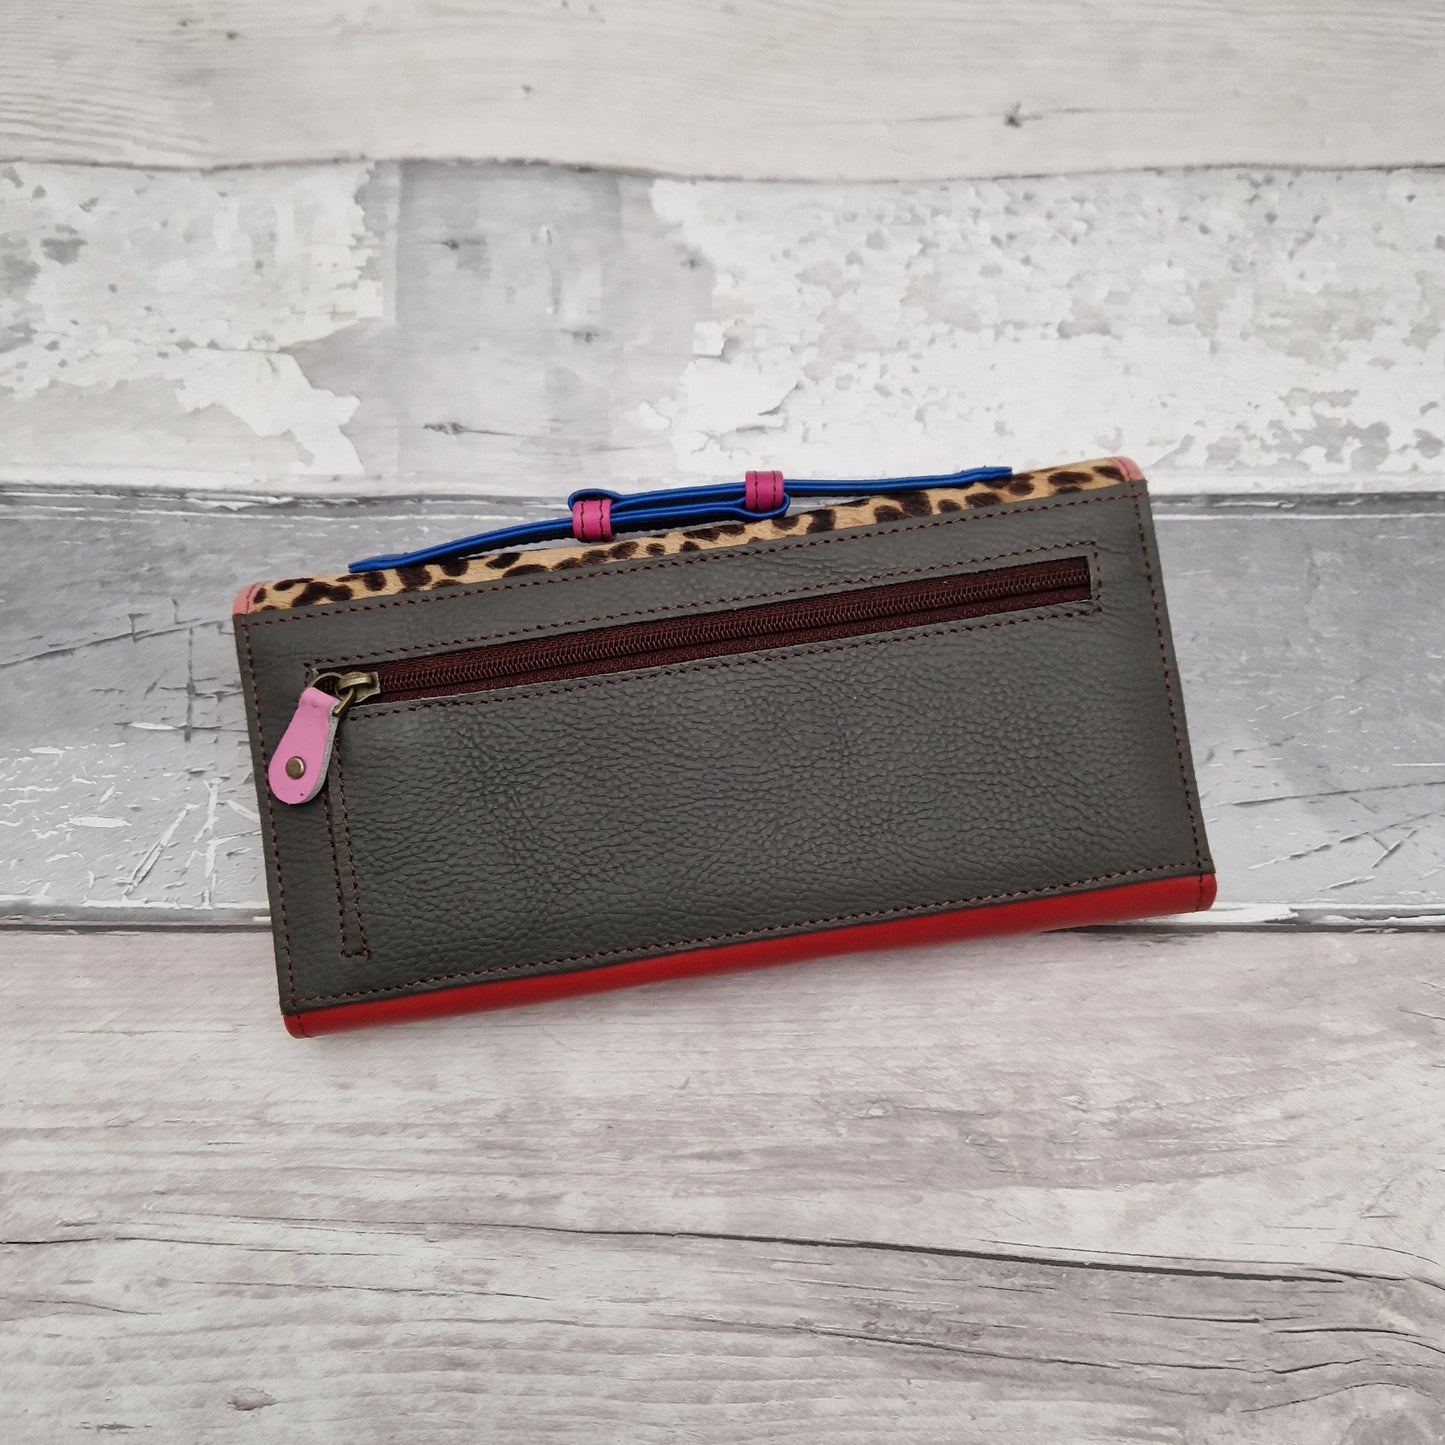 Red leather purse with a leopard print textured panel.